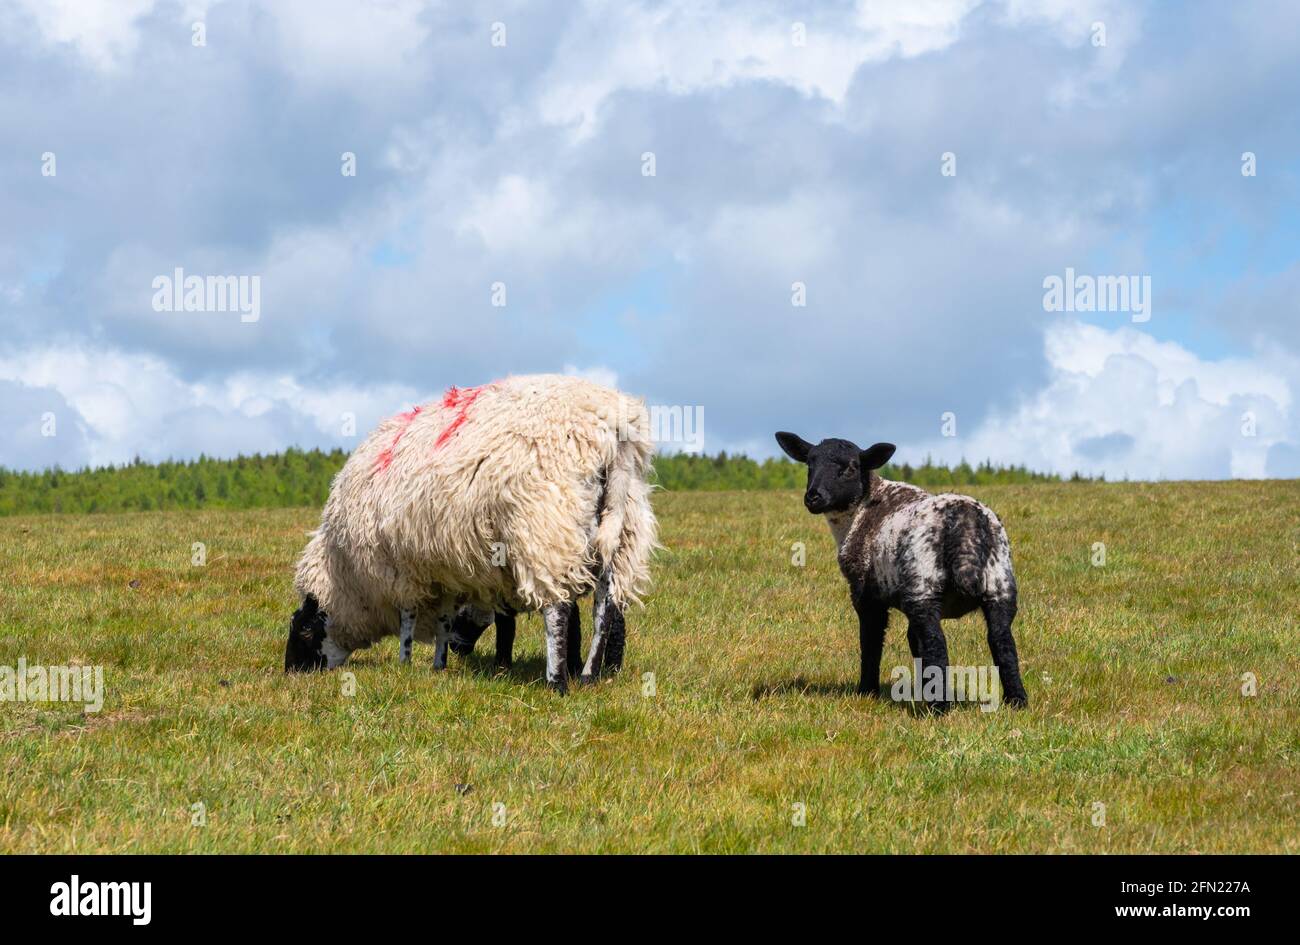 Sheep and lamb (Ovis aries) grazing on grass in a field in Spring in Arundel National Park on the South Downs in West Sussex, England, UK. Stock Photo